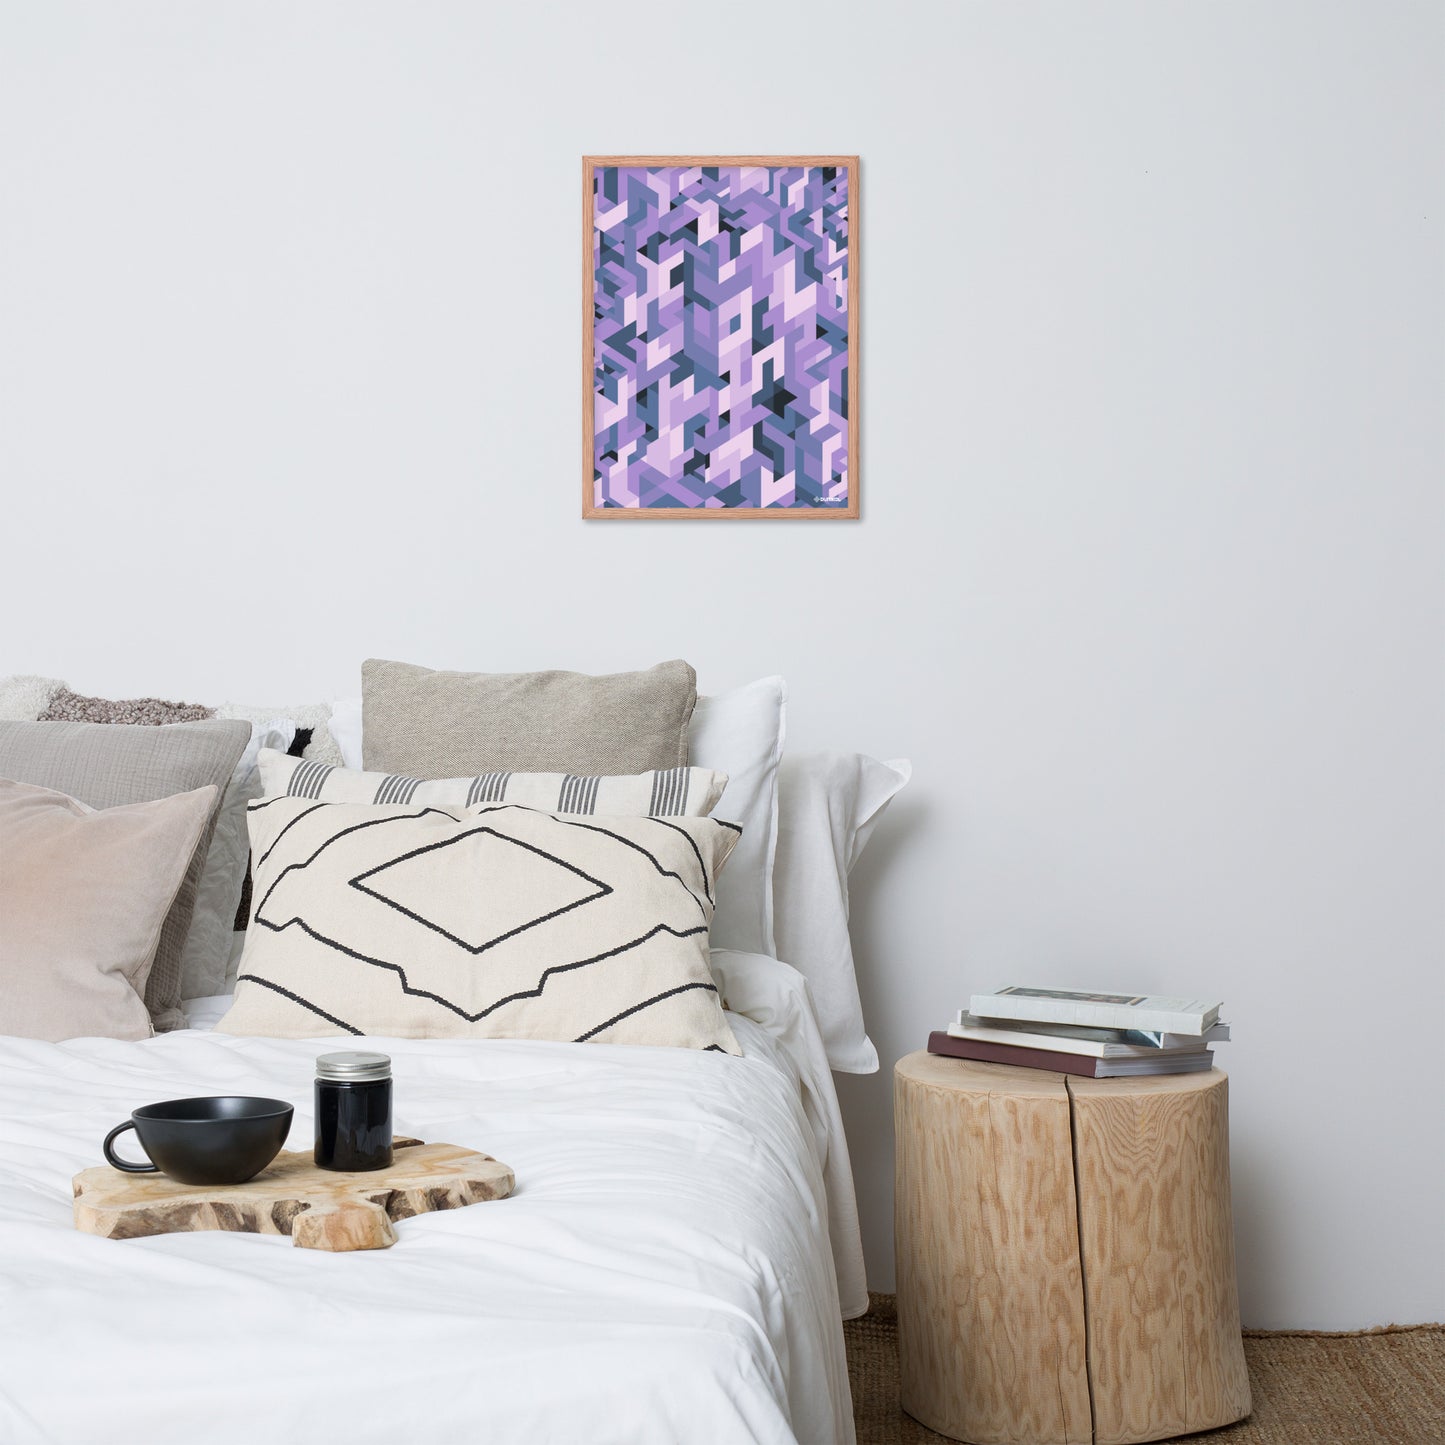 Framed Poster ❯ Isomenigme ❯ Lavender There